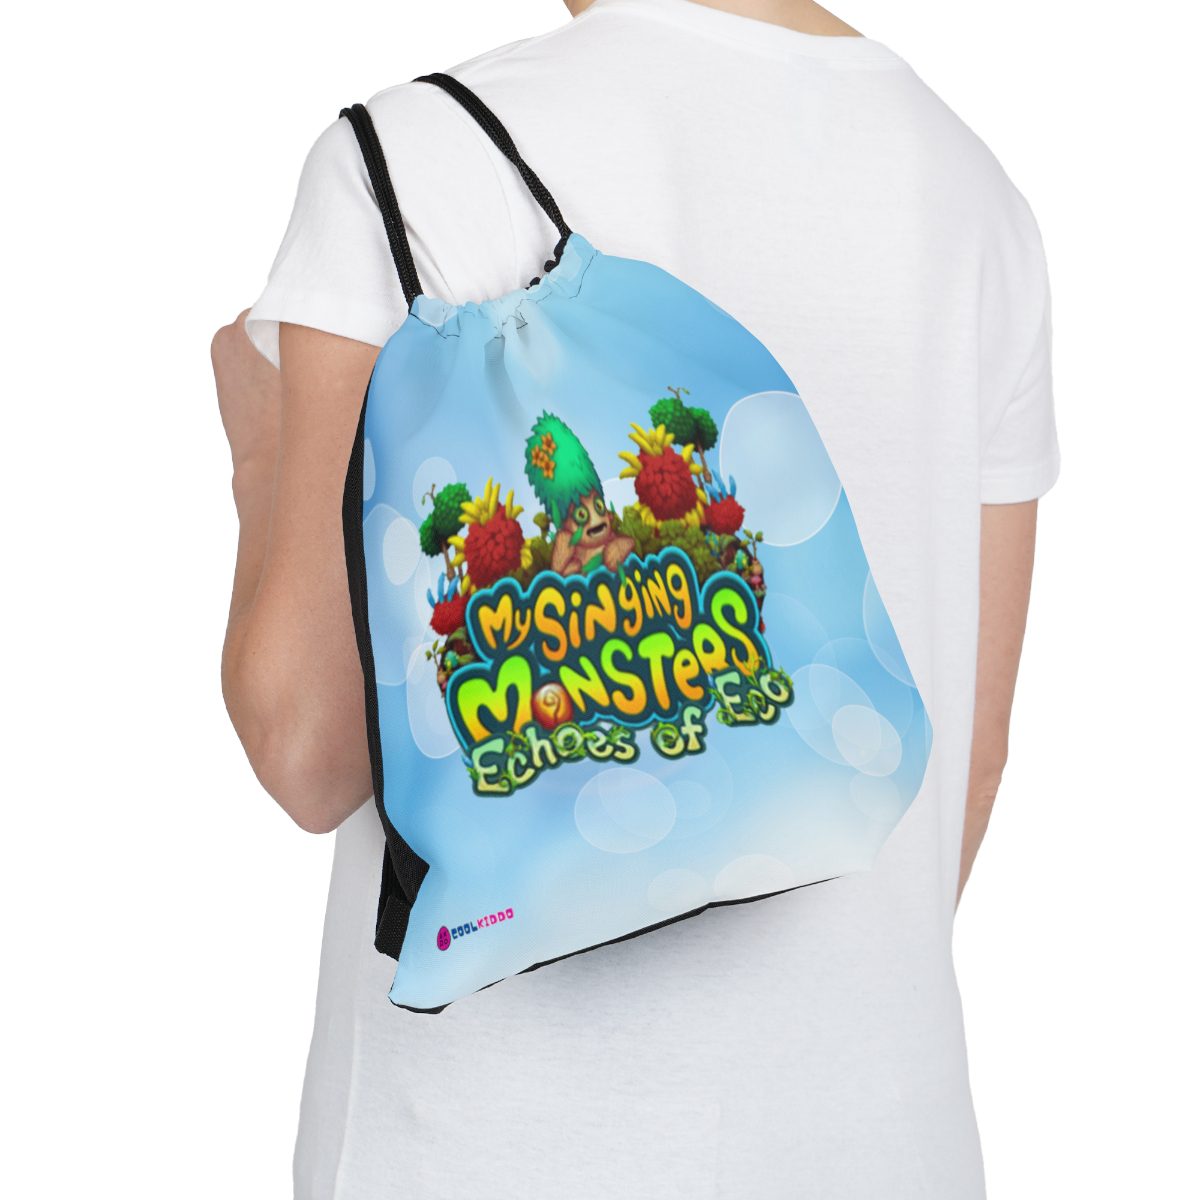 My Singing Monsters Echoes of Eco Blue and Green Drawstring Bag Cool Kiddo 18